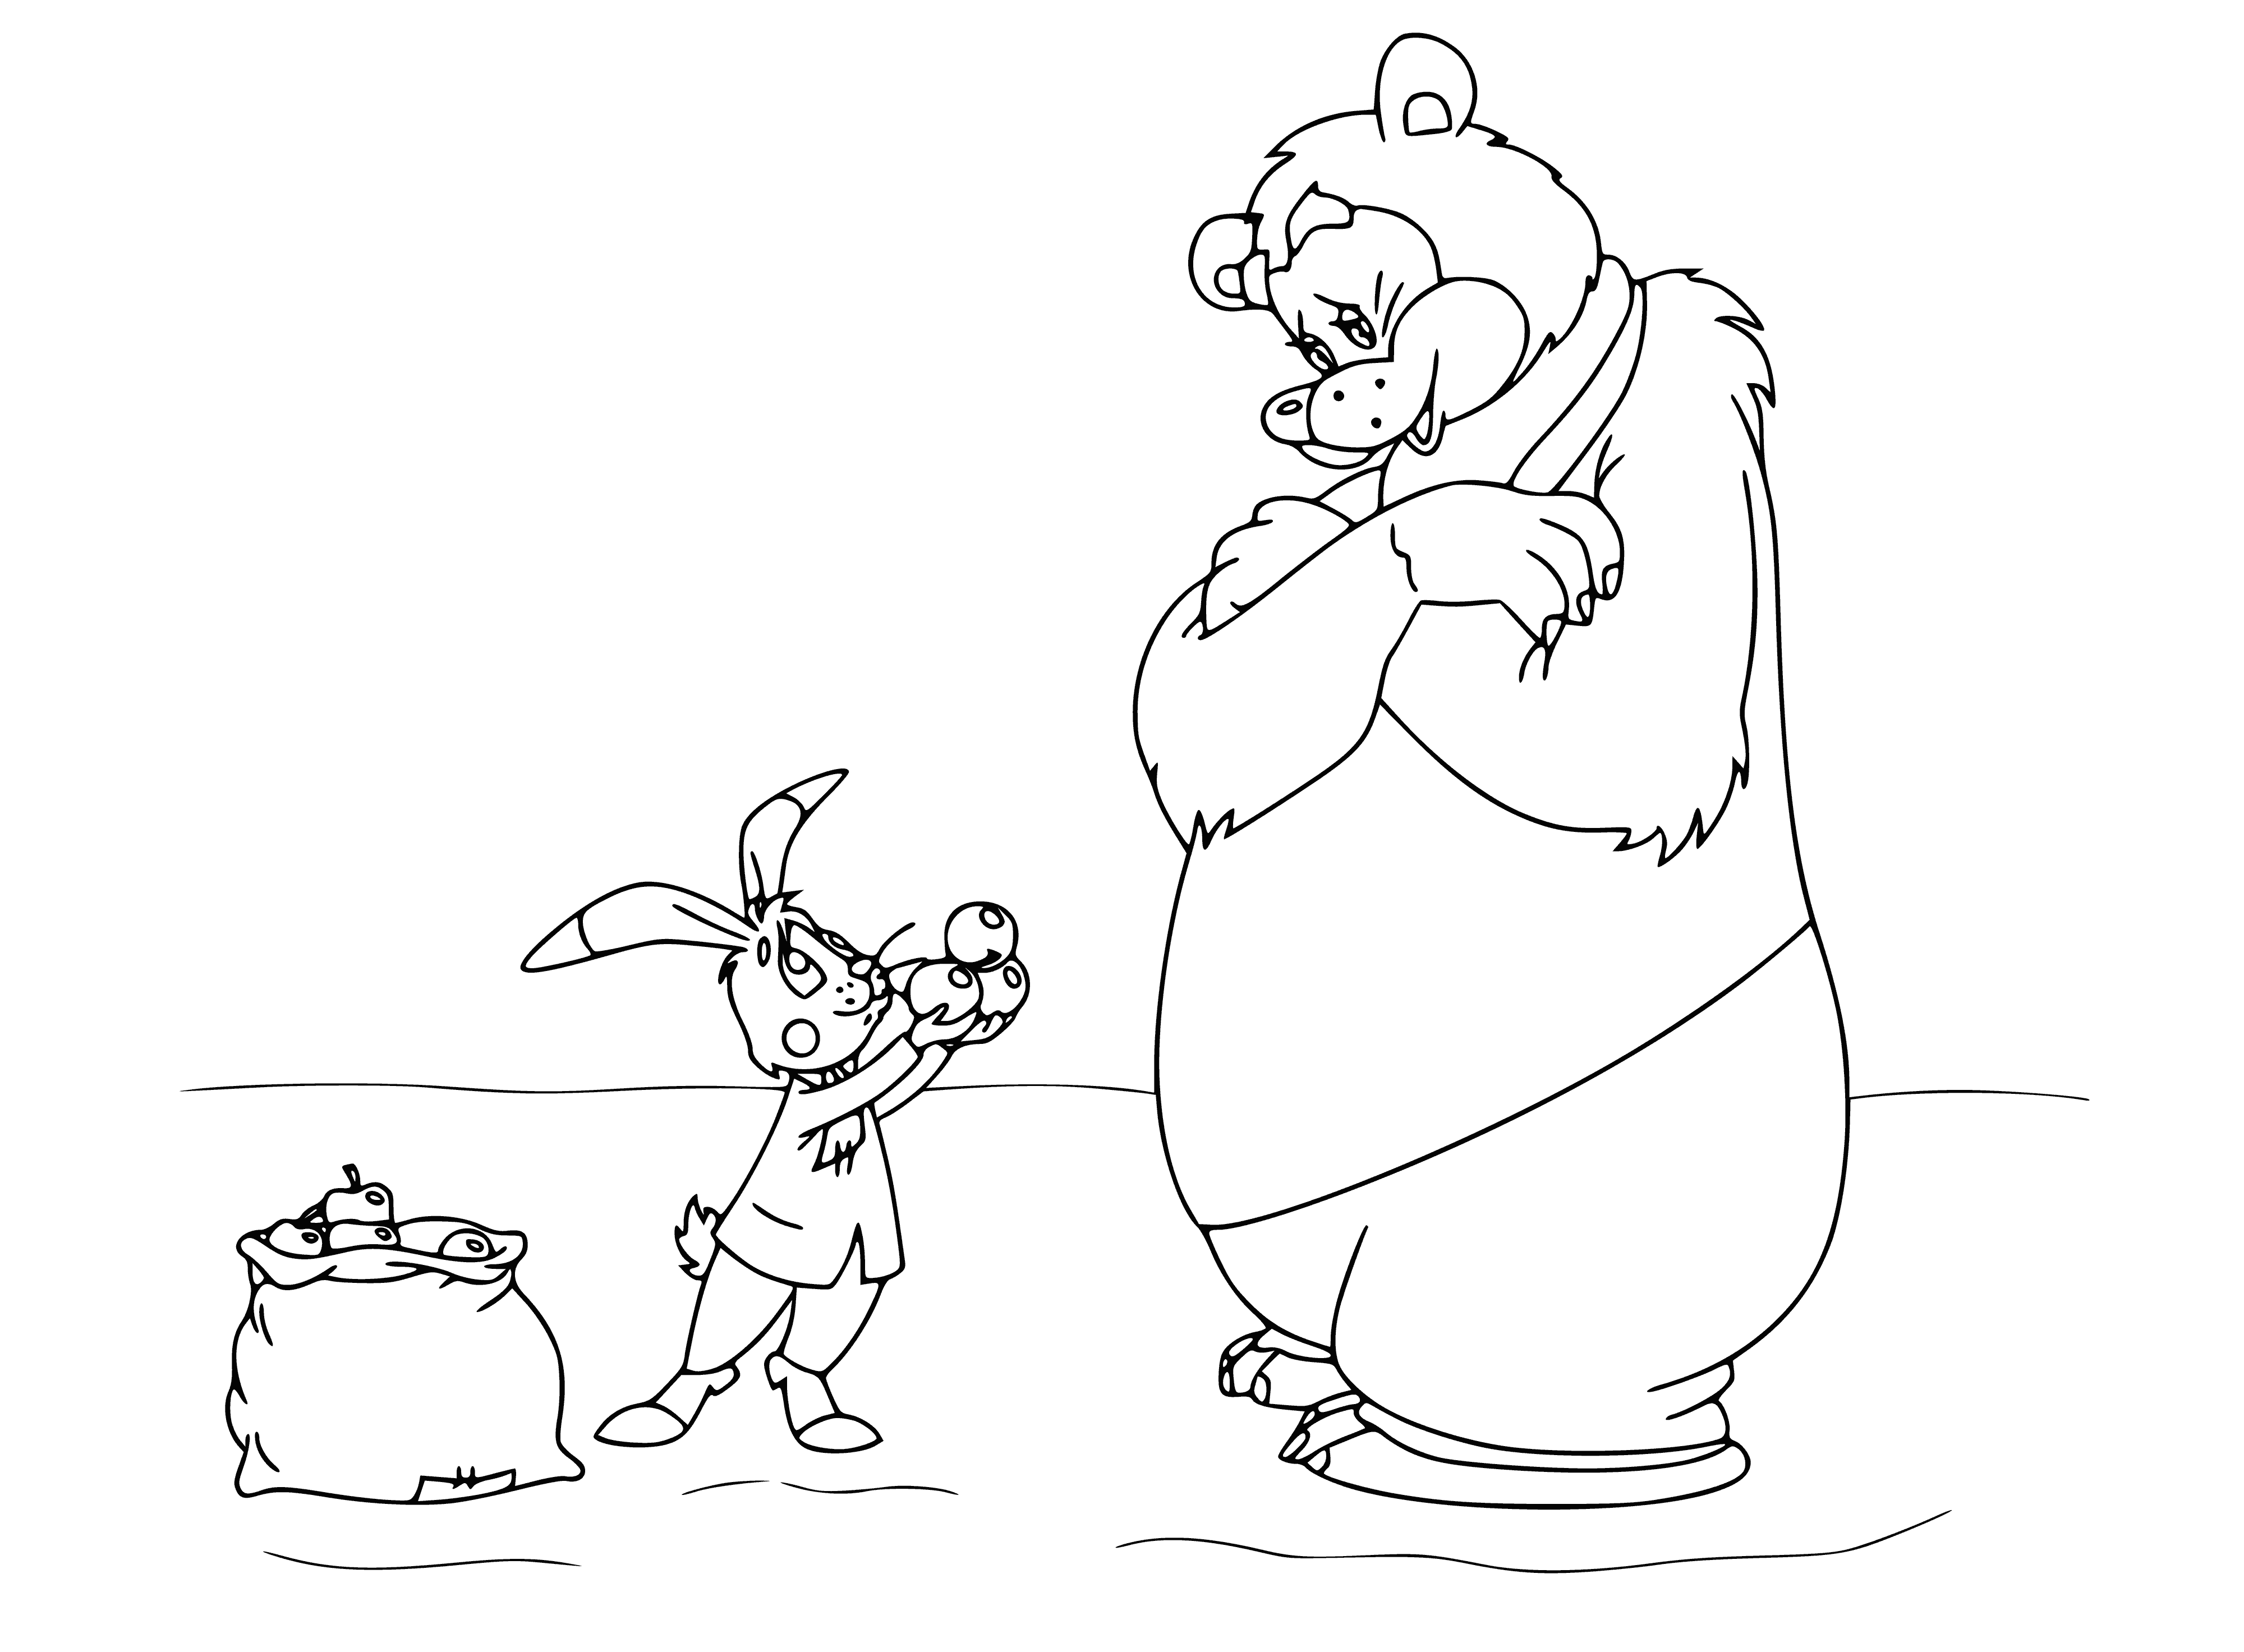 coloring page: The hare hands the bear a bag of apples, both looking pleased. Background shows trees and leaves.